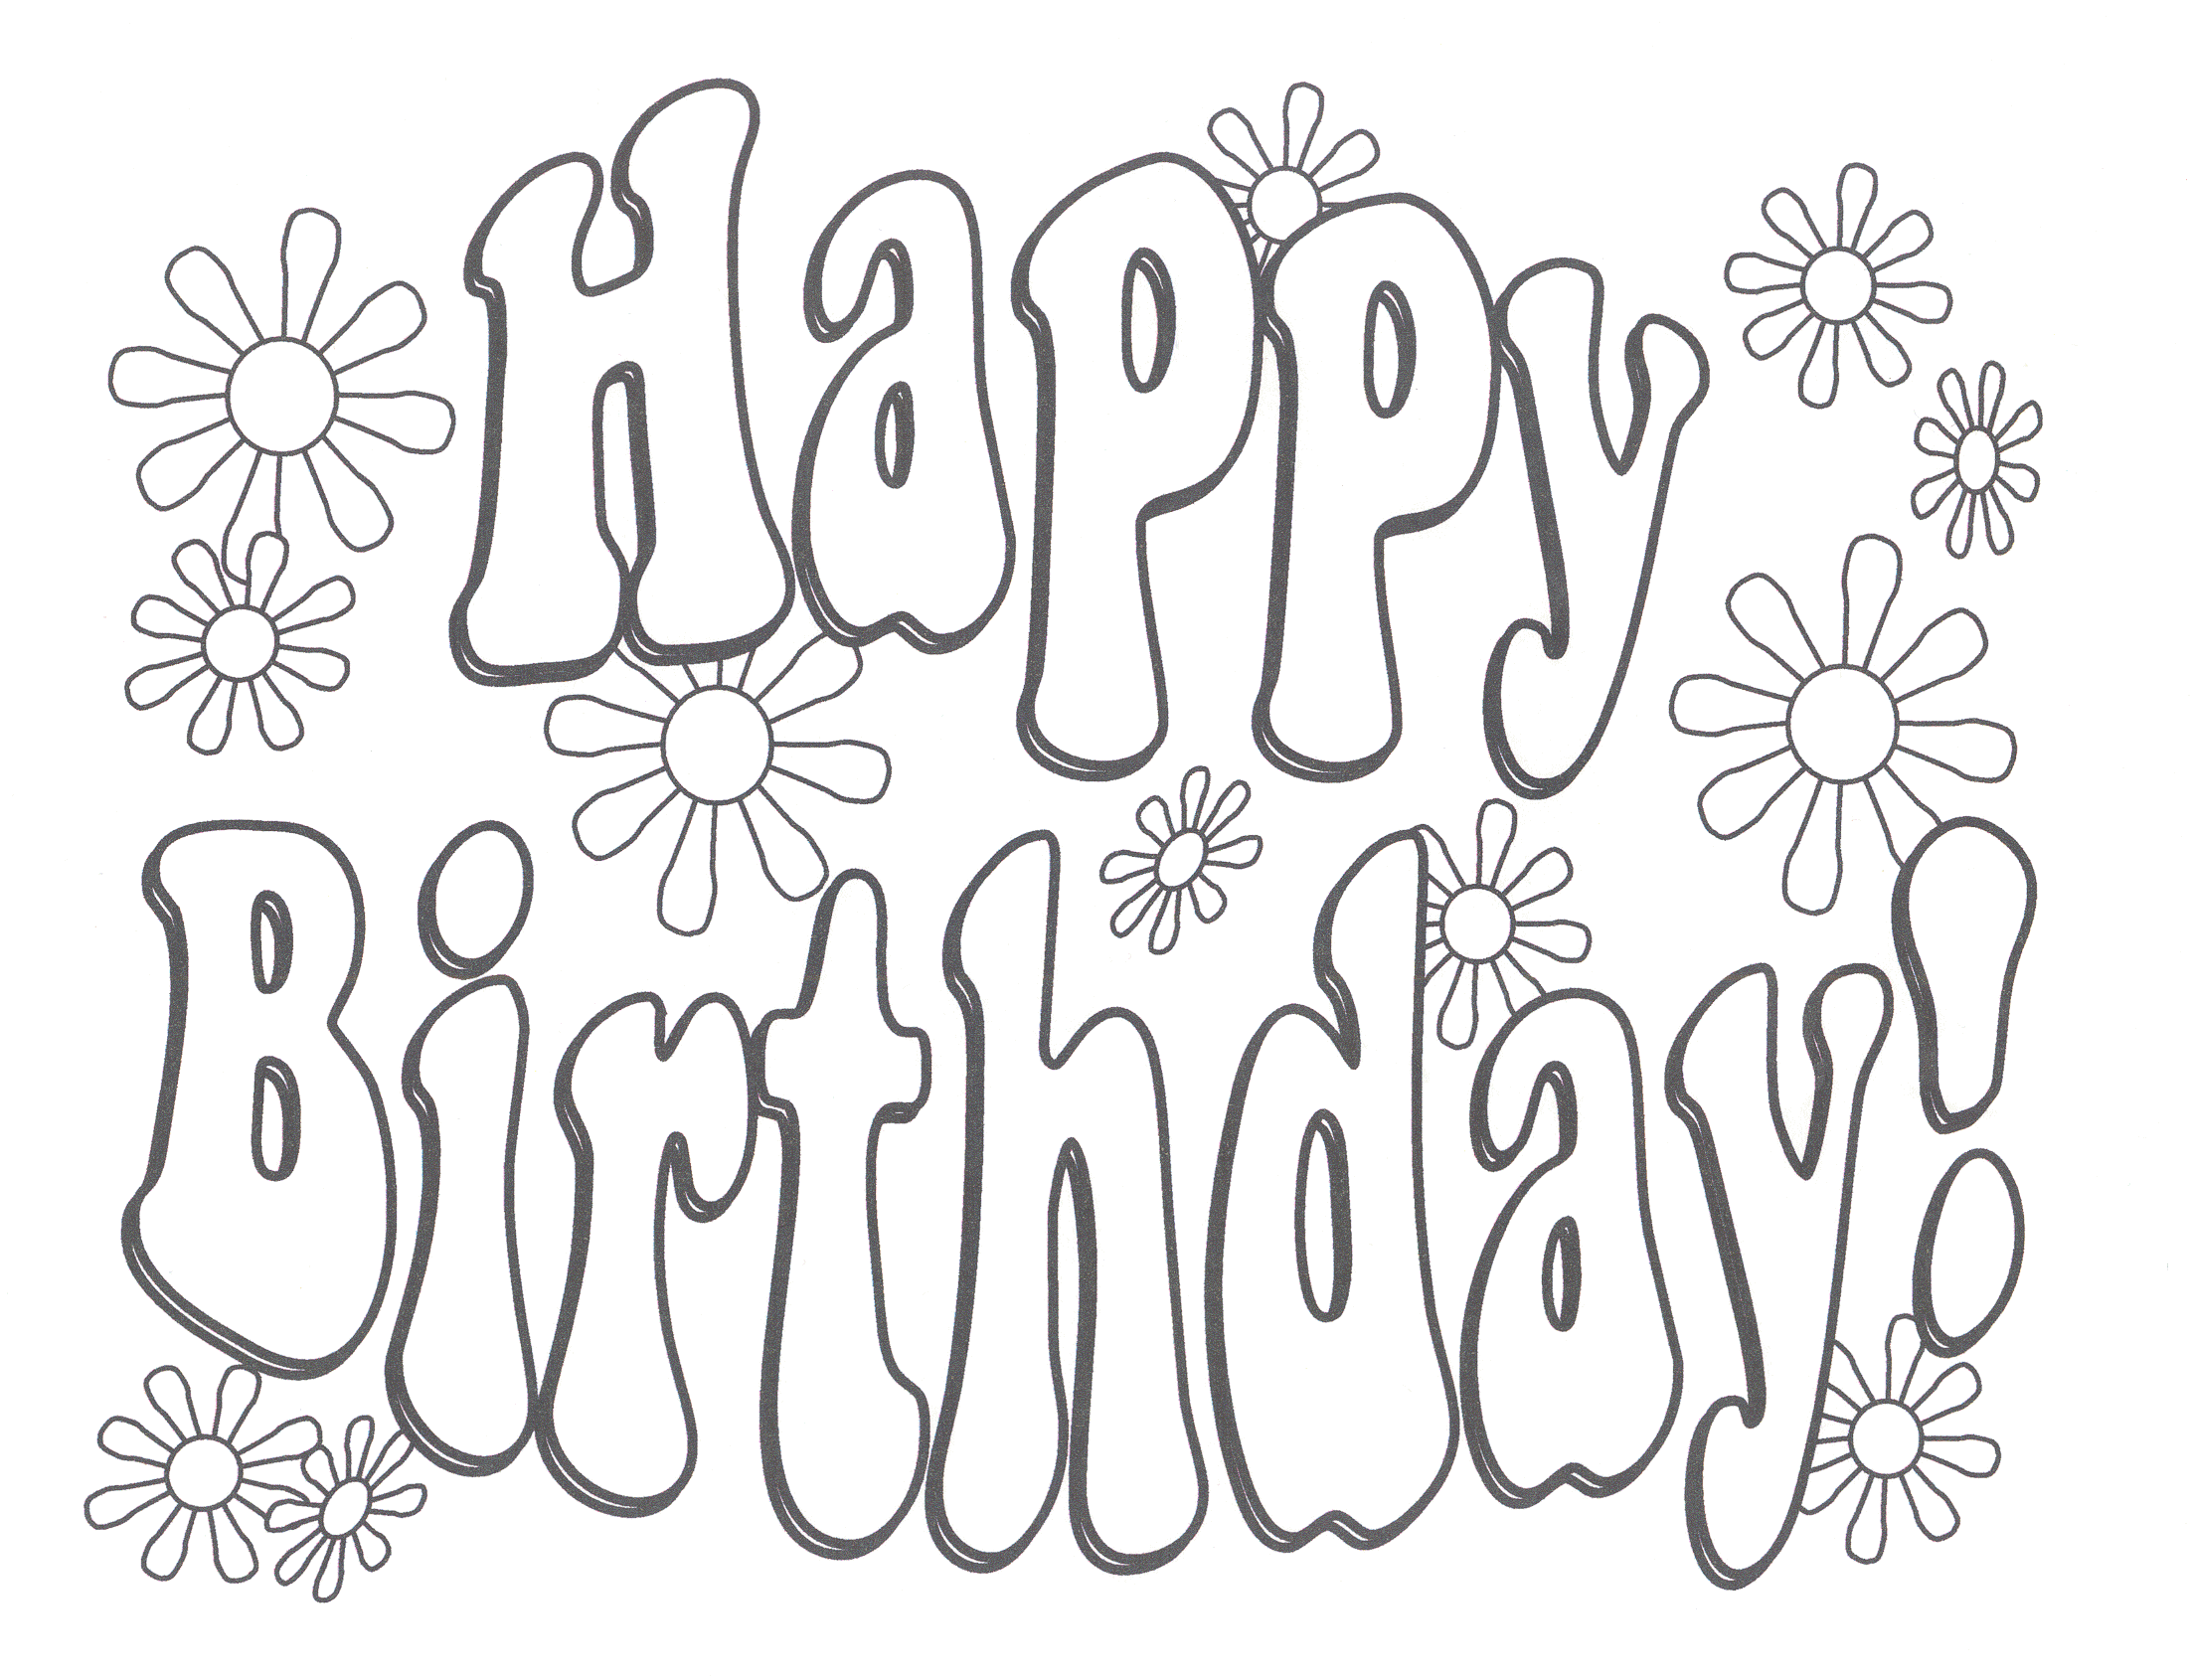 14 happy birthday coloring pages for kids - Print Color Craft